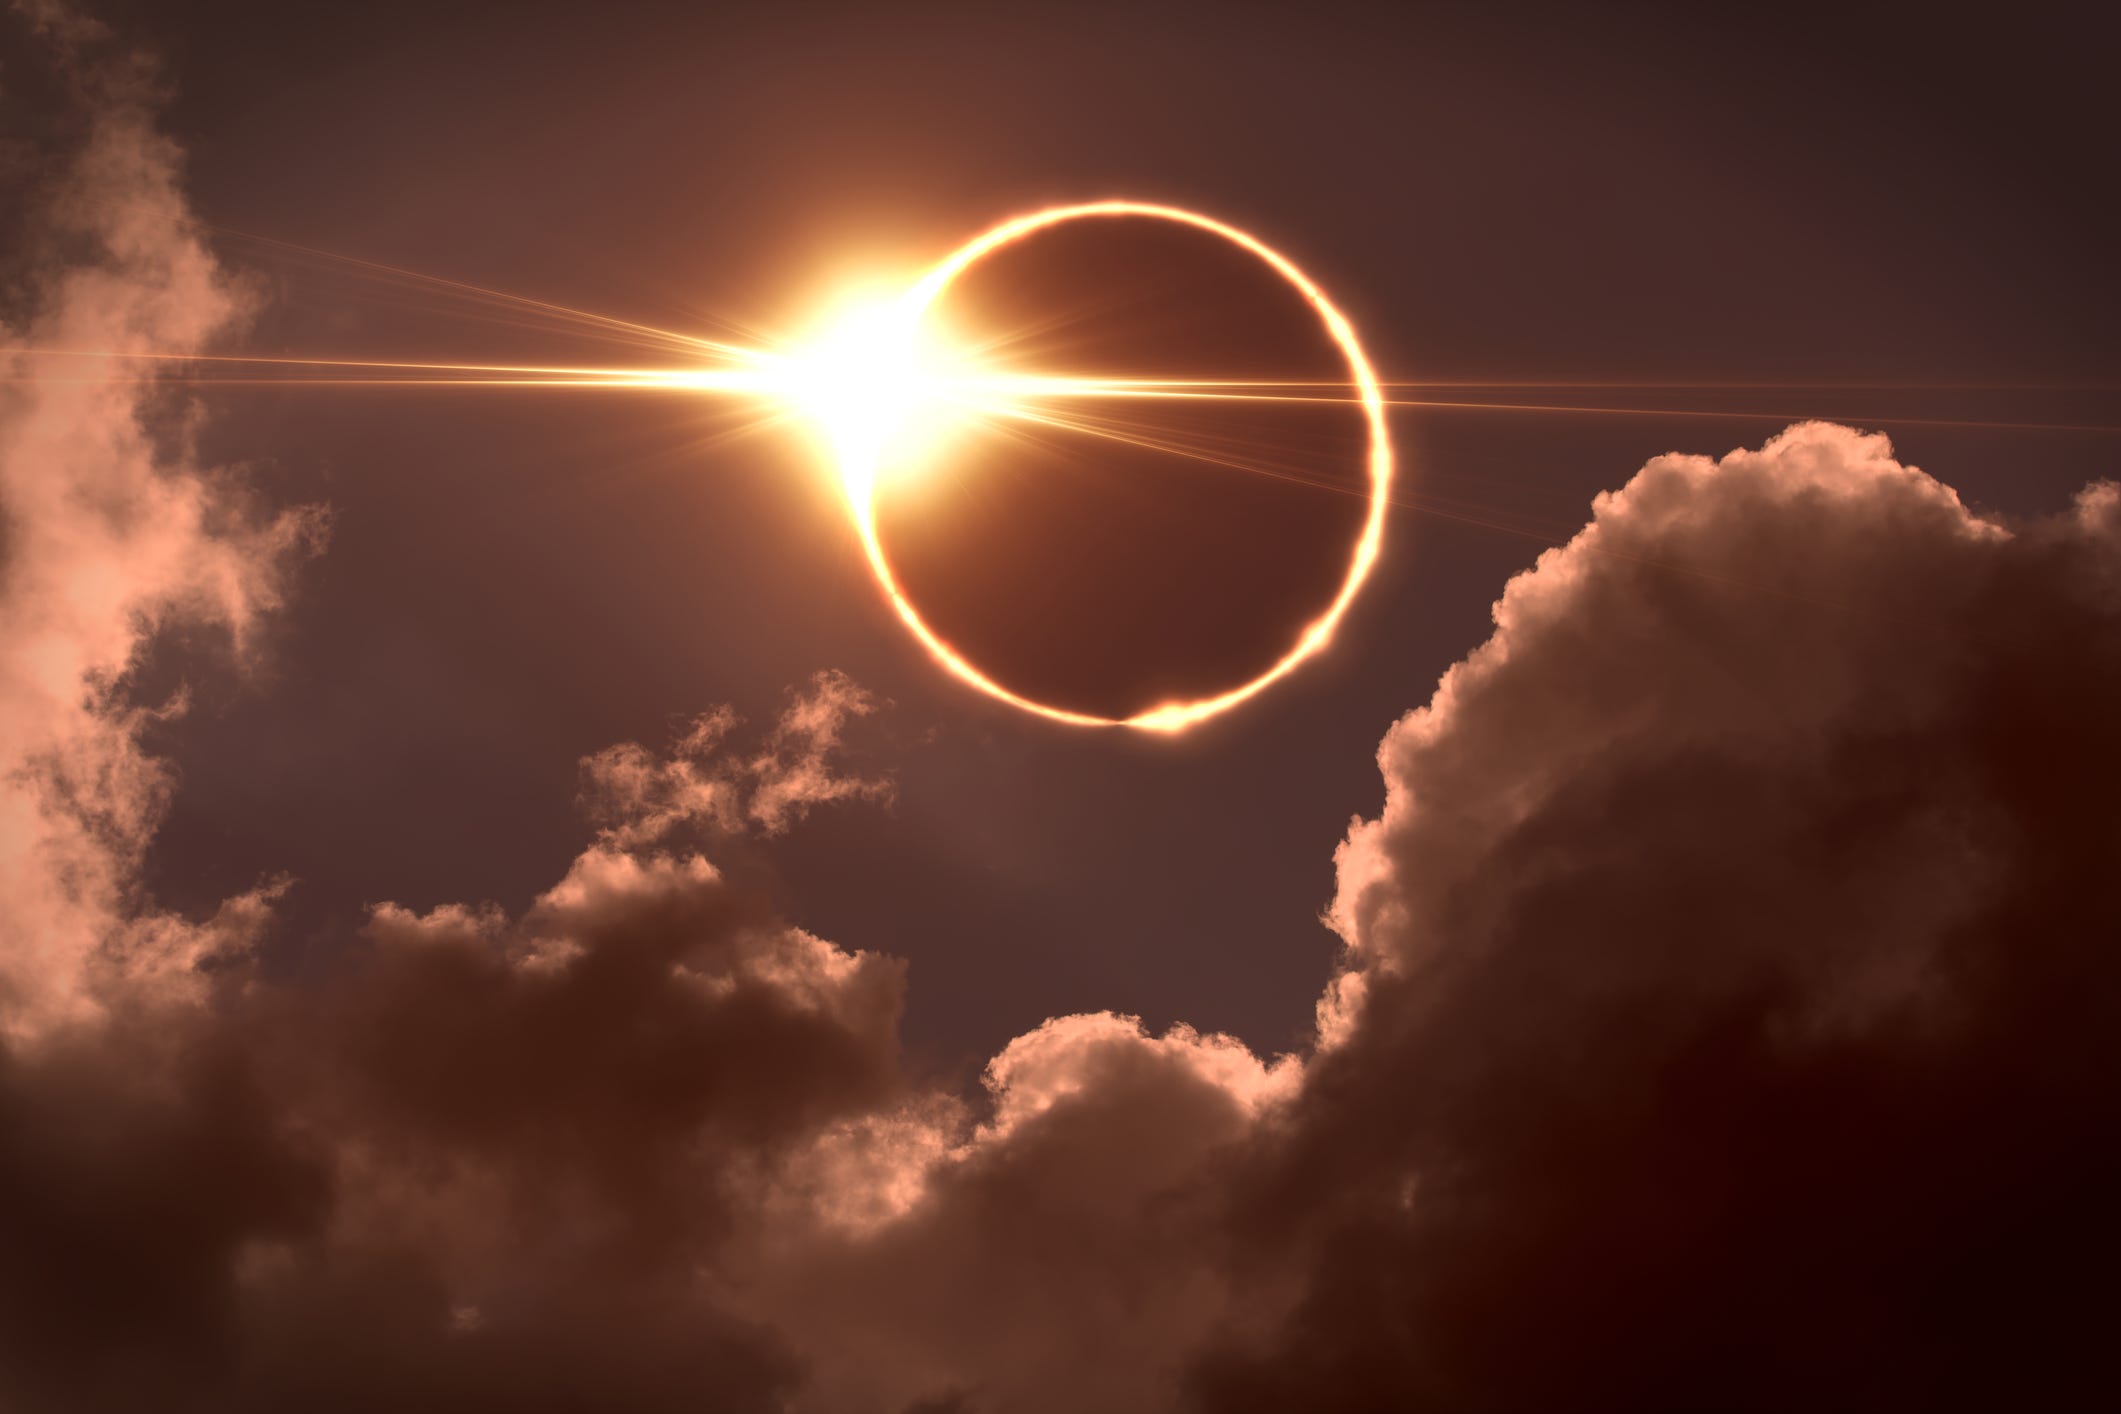 <ul class="summary-list"><li>In April, millions of Americans can experience a total solar eclipse as it sweeps across the US.</li><li>NASA says choosing where to watch is important because eclipses rarely occur in the same place twice.</li><li>Here is a list of the 10 largest US cities in the path of totality. </li></ul><p>On April 8, more than two dozen US cities will plunge into darkness when a total solar eclipse completely blots out the sun. </p><p>These cities are in what's called the "path of totality," which will run from southwest <a href="https://www.businessinsider.com/how-where-when-see-solar-eclipse-united-states-nasa-map-2023-3">Texas to northern Maine</a>. </p><p>Those not in the path of totality won't experience a total eclipse but can still witness a <a href="https://www.businessinsider.com/partial-solar-eclipse-in-august-2018-8">partial one</a>. However, experts say it's worth traveling to see the total eclipse if you can make it. </p><p>"In choosing your location, you really are choosing <a href="https://www.businessinsider.com/why-2024-total-solar-eclipse-cool-best-special-nasa-2024-1">something that's special</a>," Kelly Korreck, NASA's program manager for the 2024 solar eclipse, told Business Insider. </p><p>Solar eclipses happen relatively frequently worldwide, but a total eclipse will only pass over the same city every 400 to 1,000 years, Korreck said. "You probably won't see another one there in your lifetime," she added.</p><p>Here are the 10 largest cities located in the path of totality for the <a href="https://www.businessinsider.com/tips-how-to-take-pictures-photos-solar-eclipse-2024-2">Great American Eclipse of 2024</a>.</p><div class="read-original">Read the original article on <a href="https://www.businessinsider.com/great-american-total-solar-eclipse-where-view-see-cities-visible-2024-2">Business Insider</a></div>